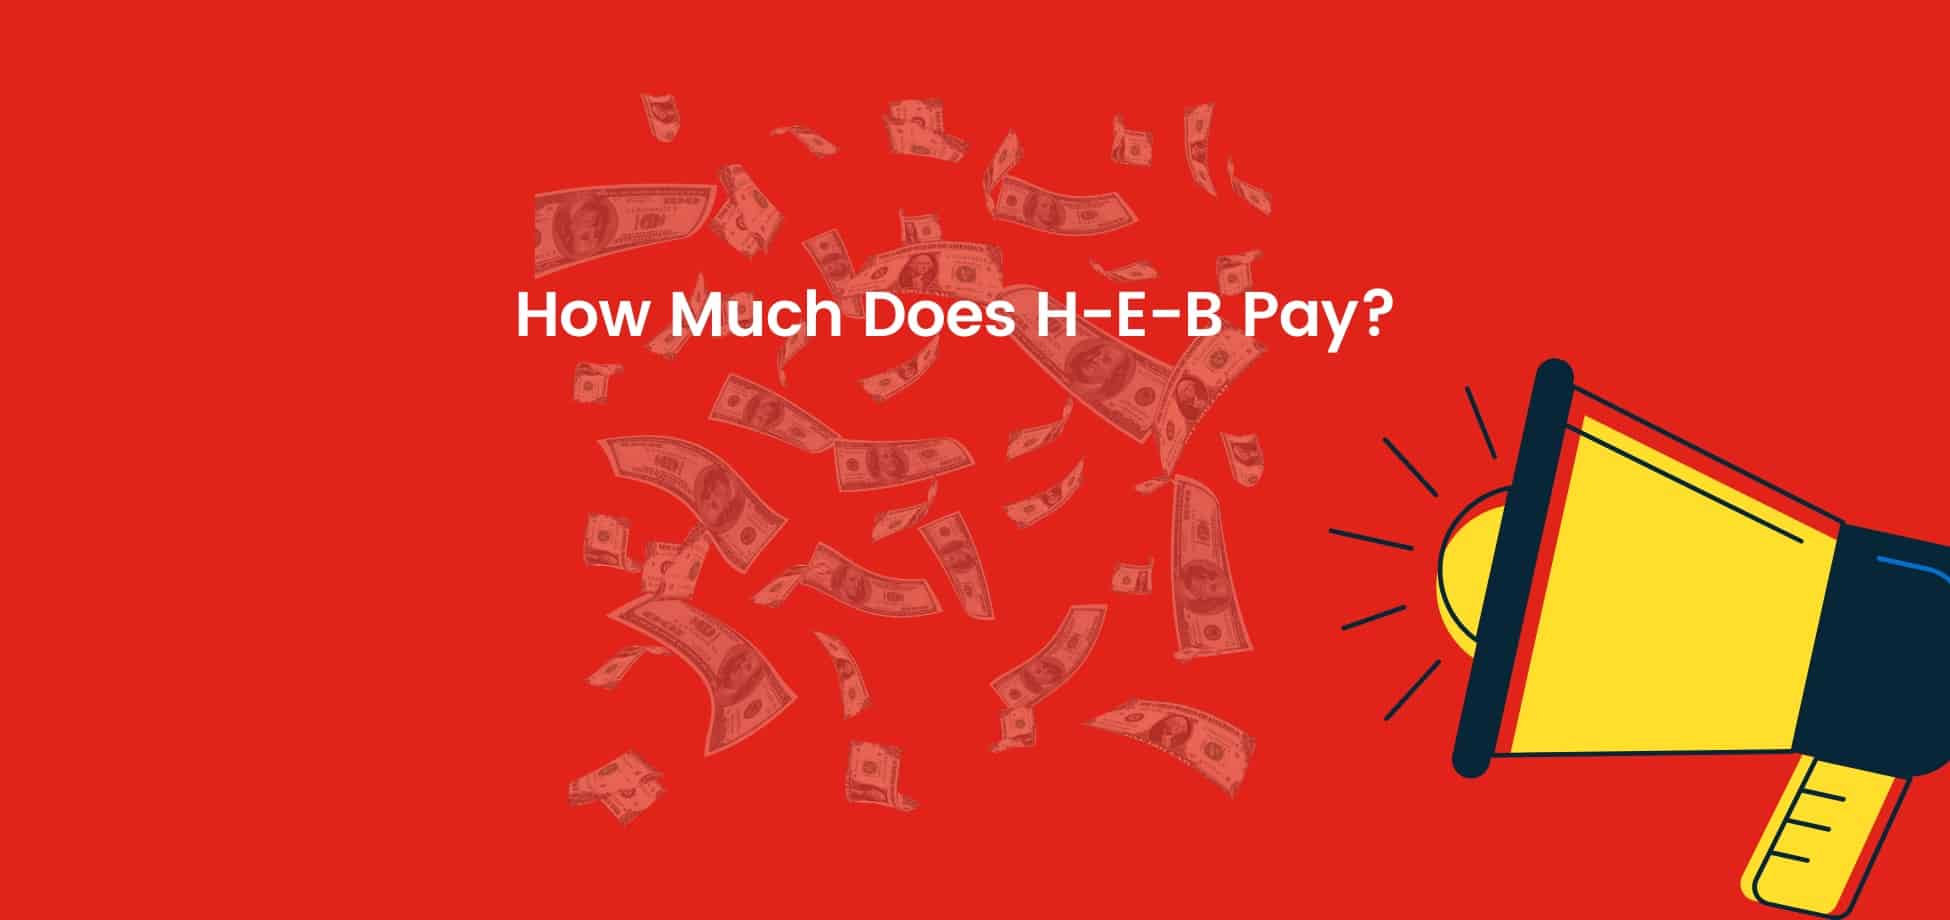 The starting pay for H-E-B is higher than most other supermarket chains.